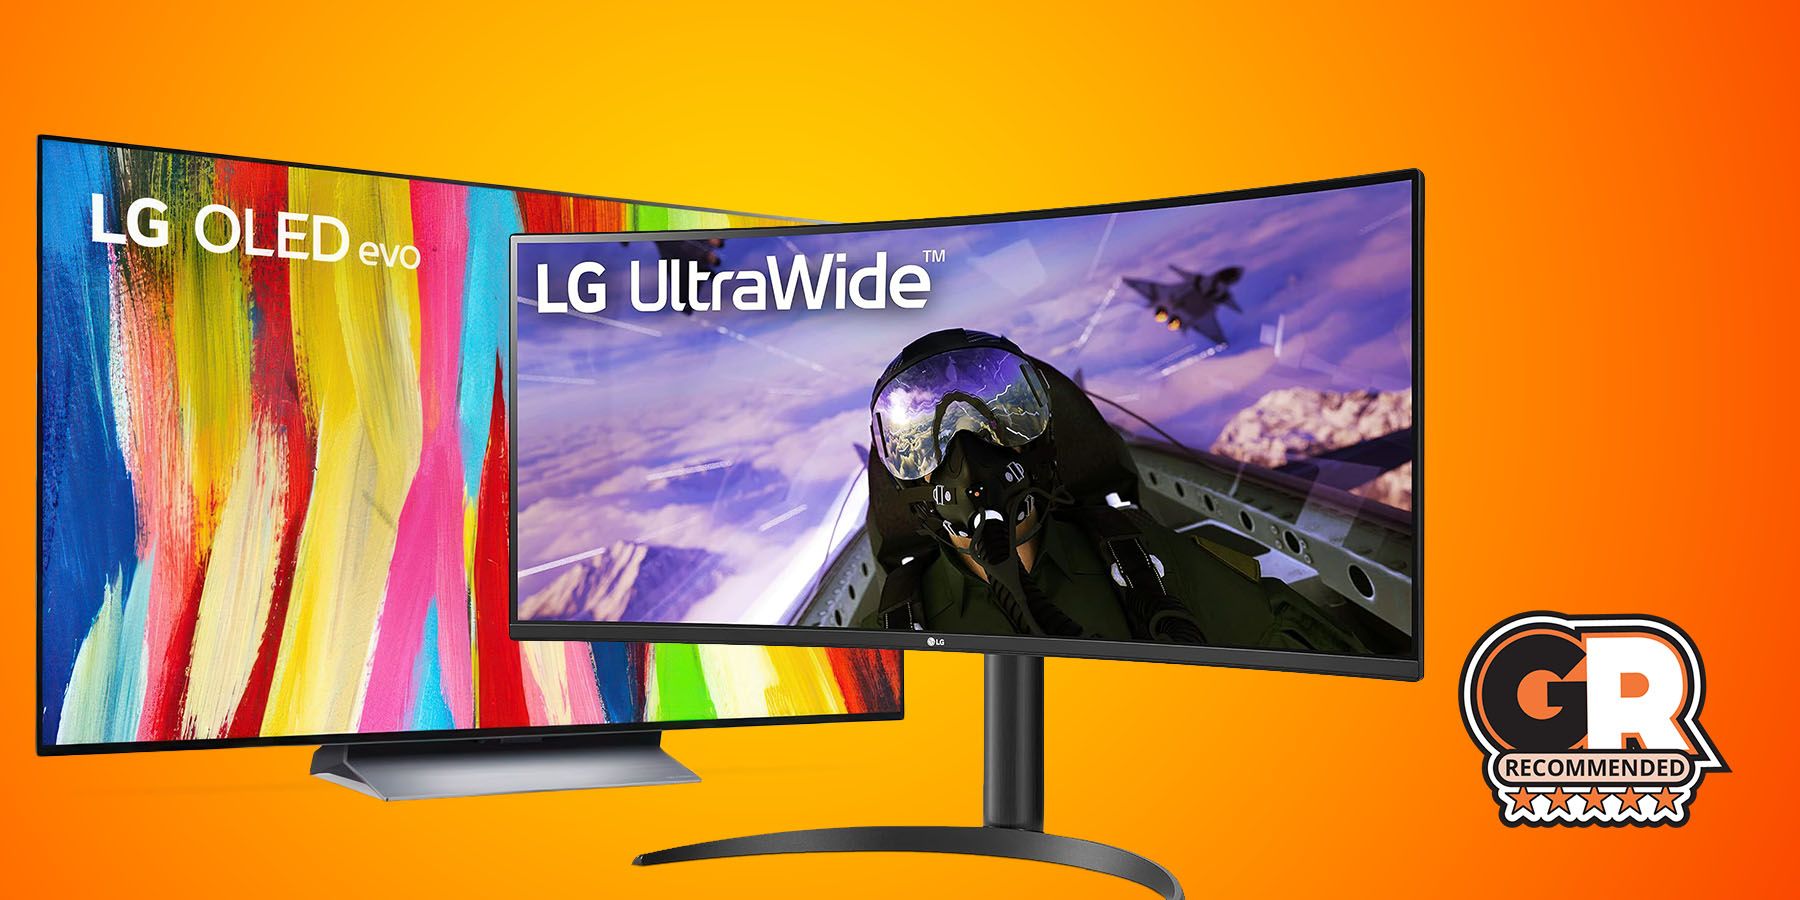 What's the best ultra-premium OLED monitor for PC gaming?